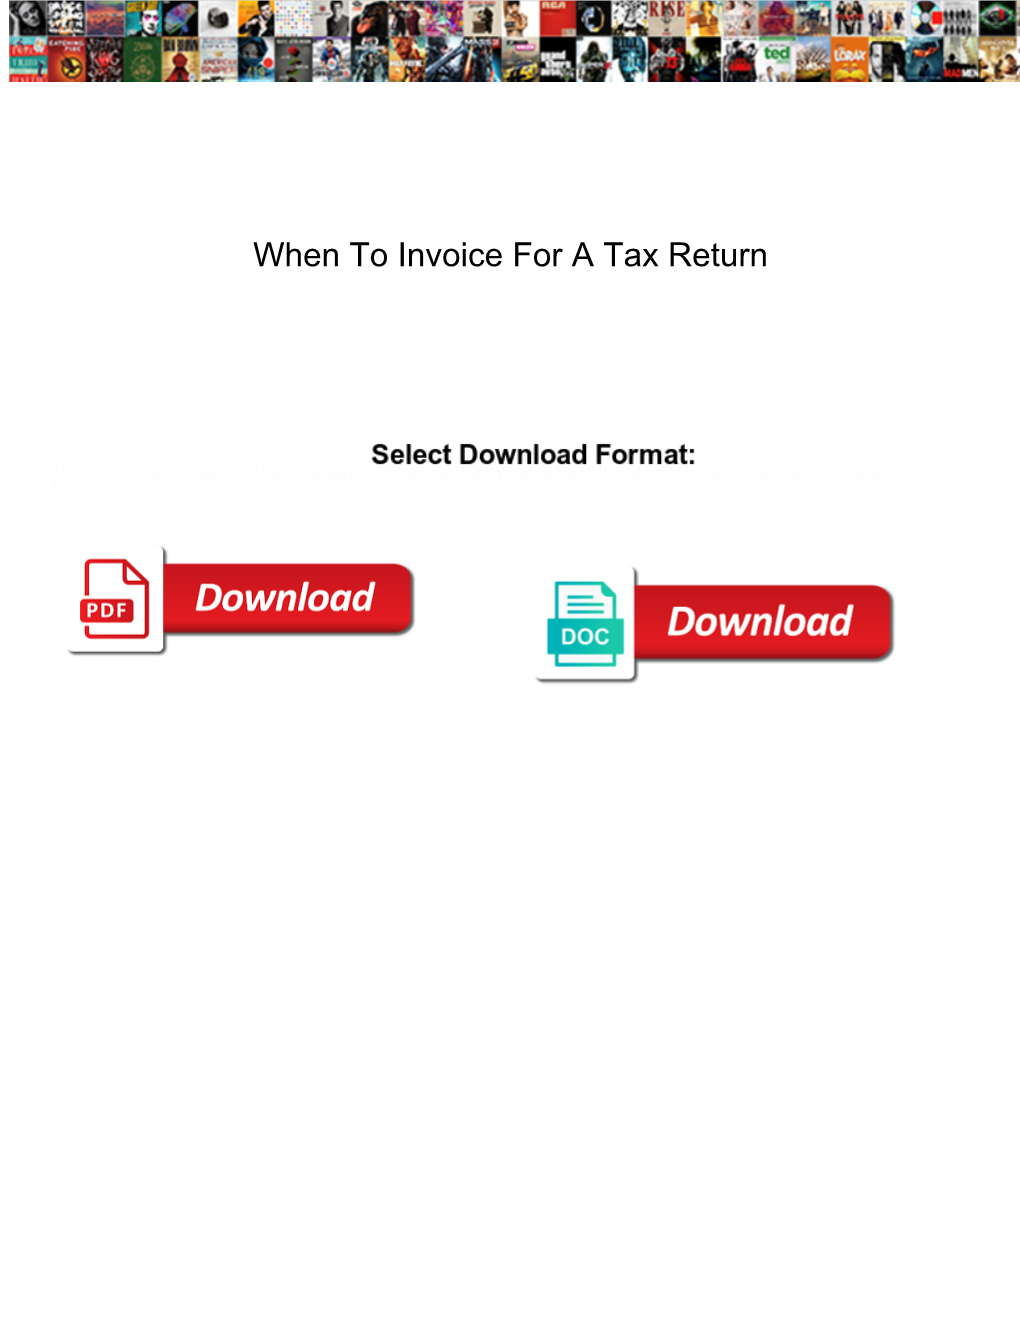 When to Invoice for a Tax Return